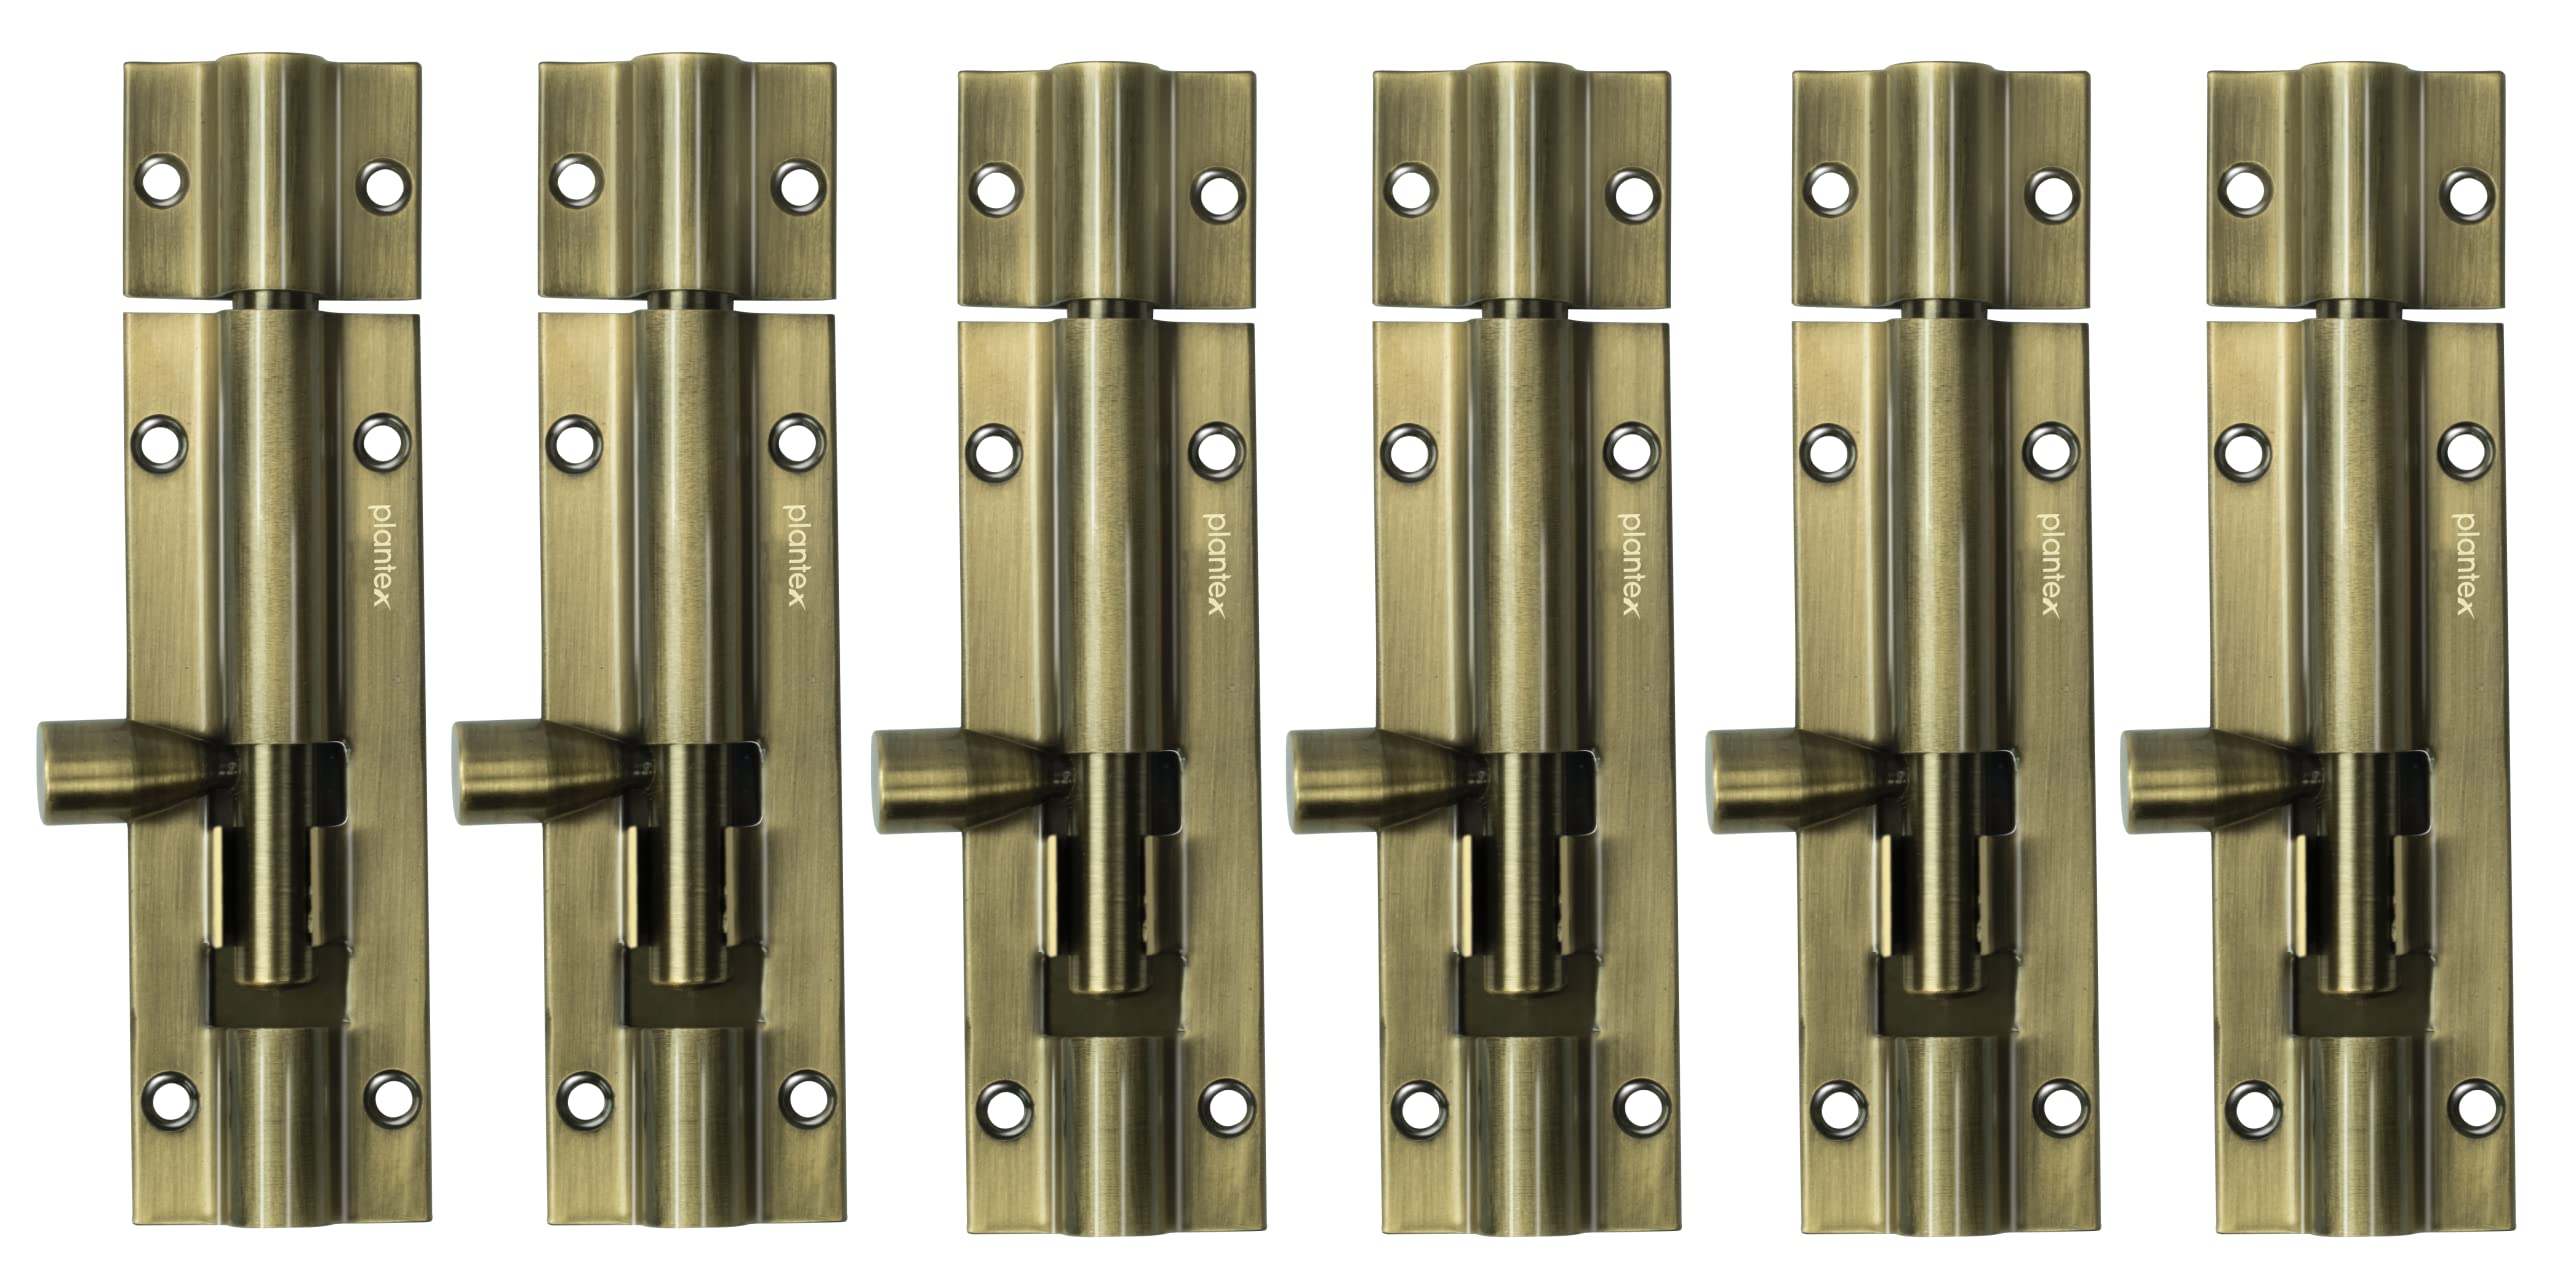 Plantex Heavy Duty 4-inch Joint-Less Tower Bolt for Wooden and PVC Doors for Home Main Door/Bathroom/Windows/Wardrobe - Pack of 6 (Stainless Steel, Brass Antique)